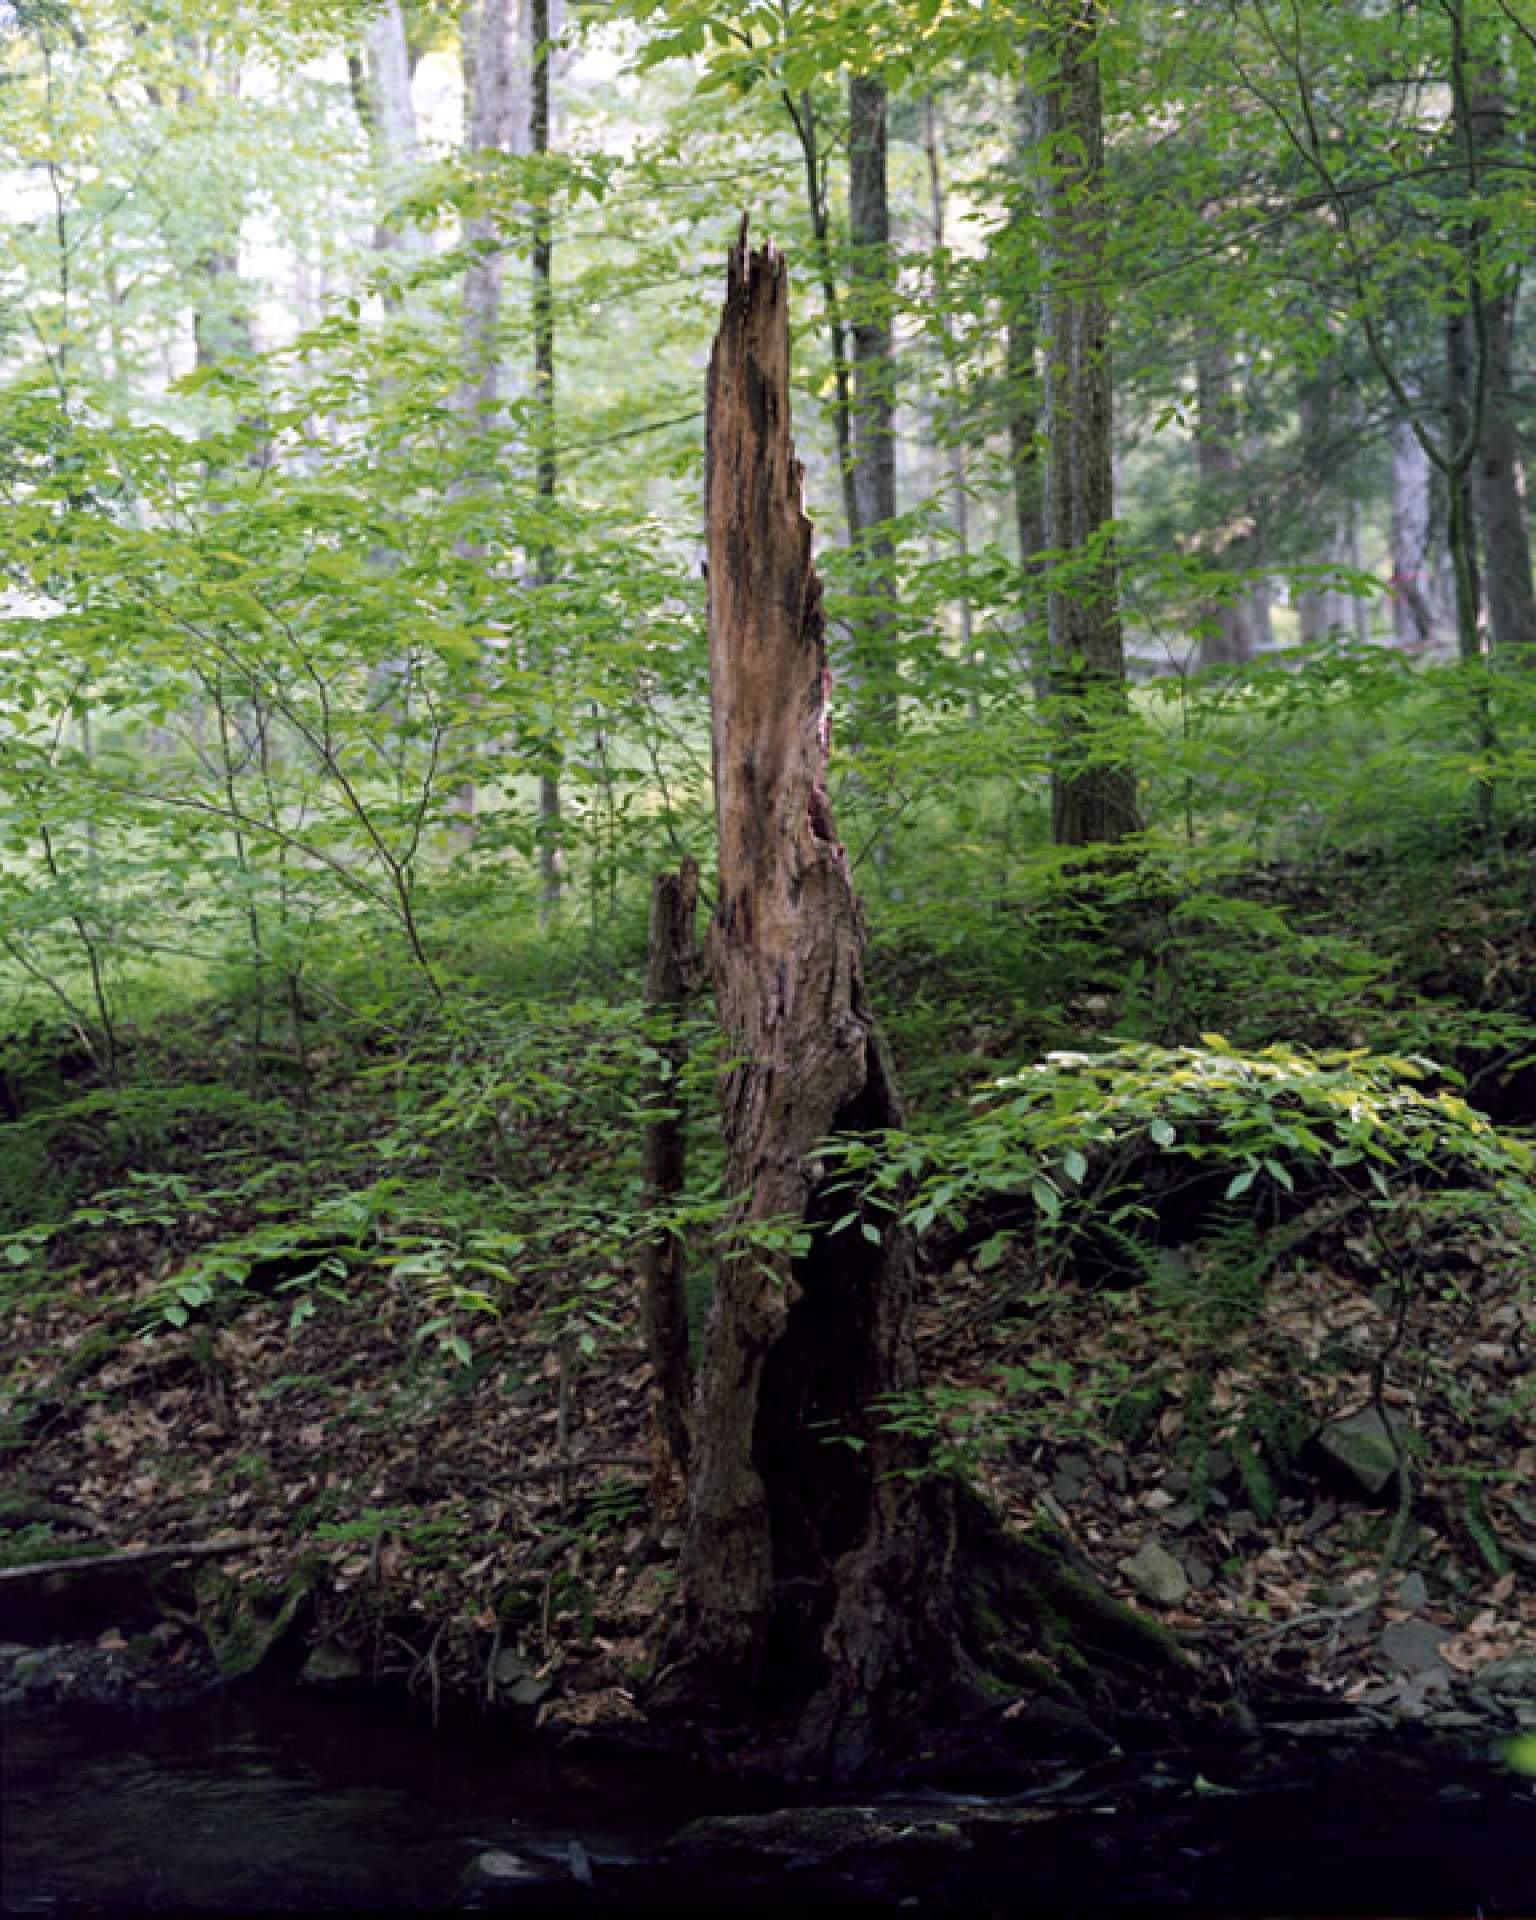 [Janelle Lynch, From the Catskill Mountains: BPAC Artist in Residence Entry June 1, 2013]